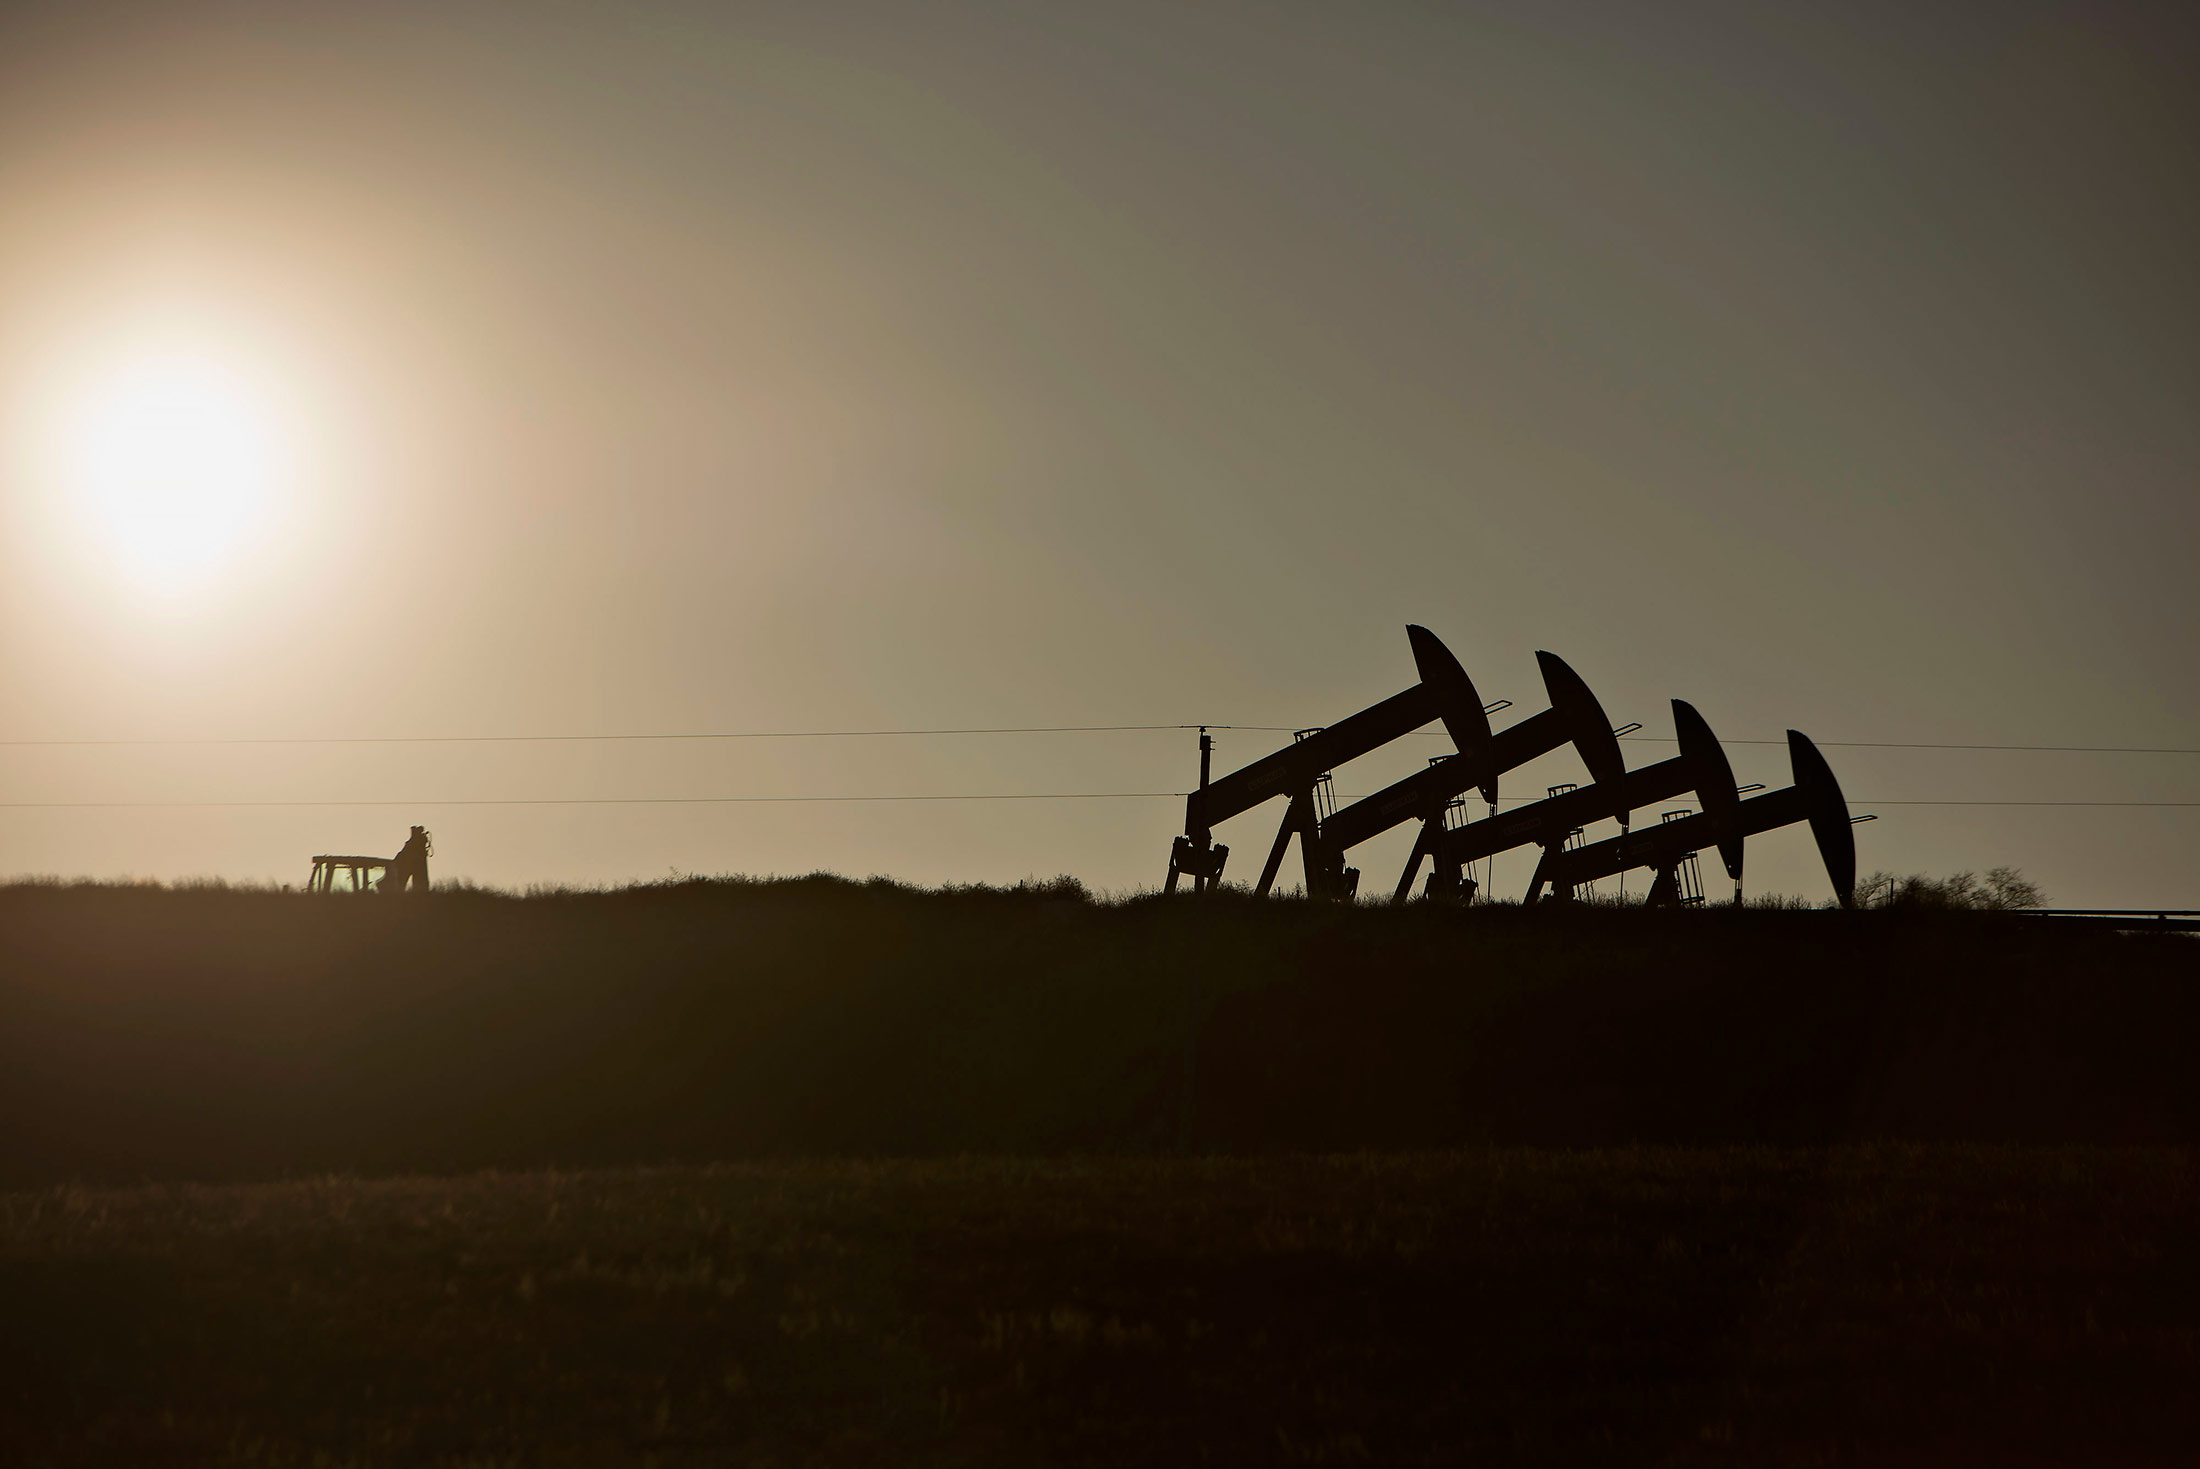 Four pumpjacks are silhouetted as they operate at the site of an oil well outside Williston, North Dakota, U.S., on Thursday, Feb. 12, 2015.
